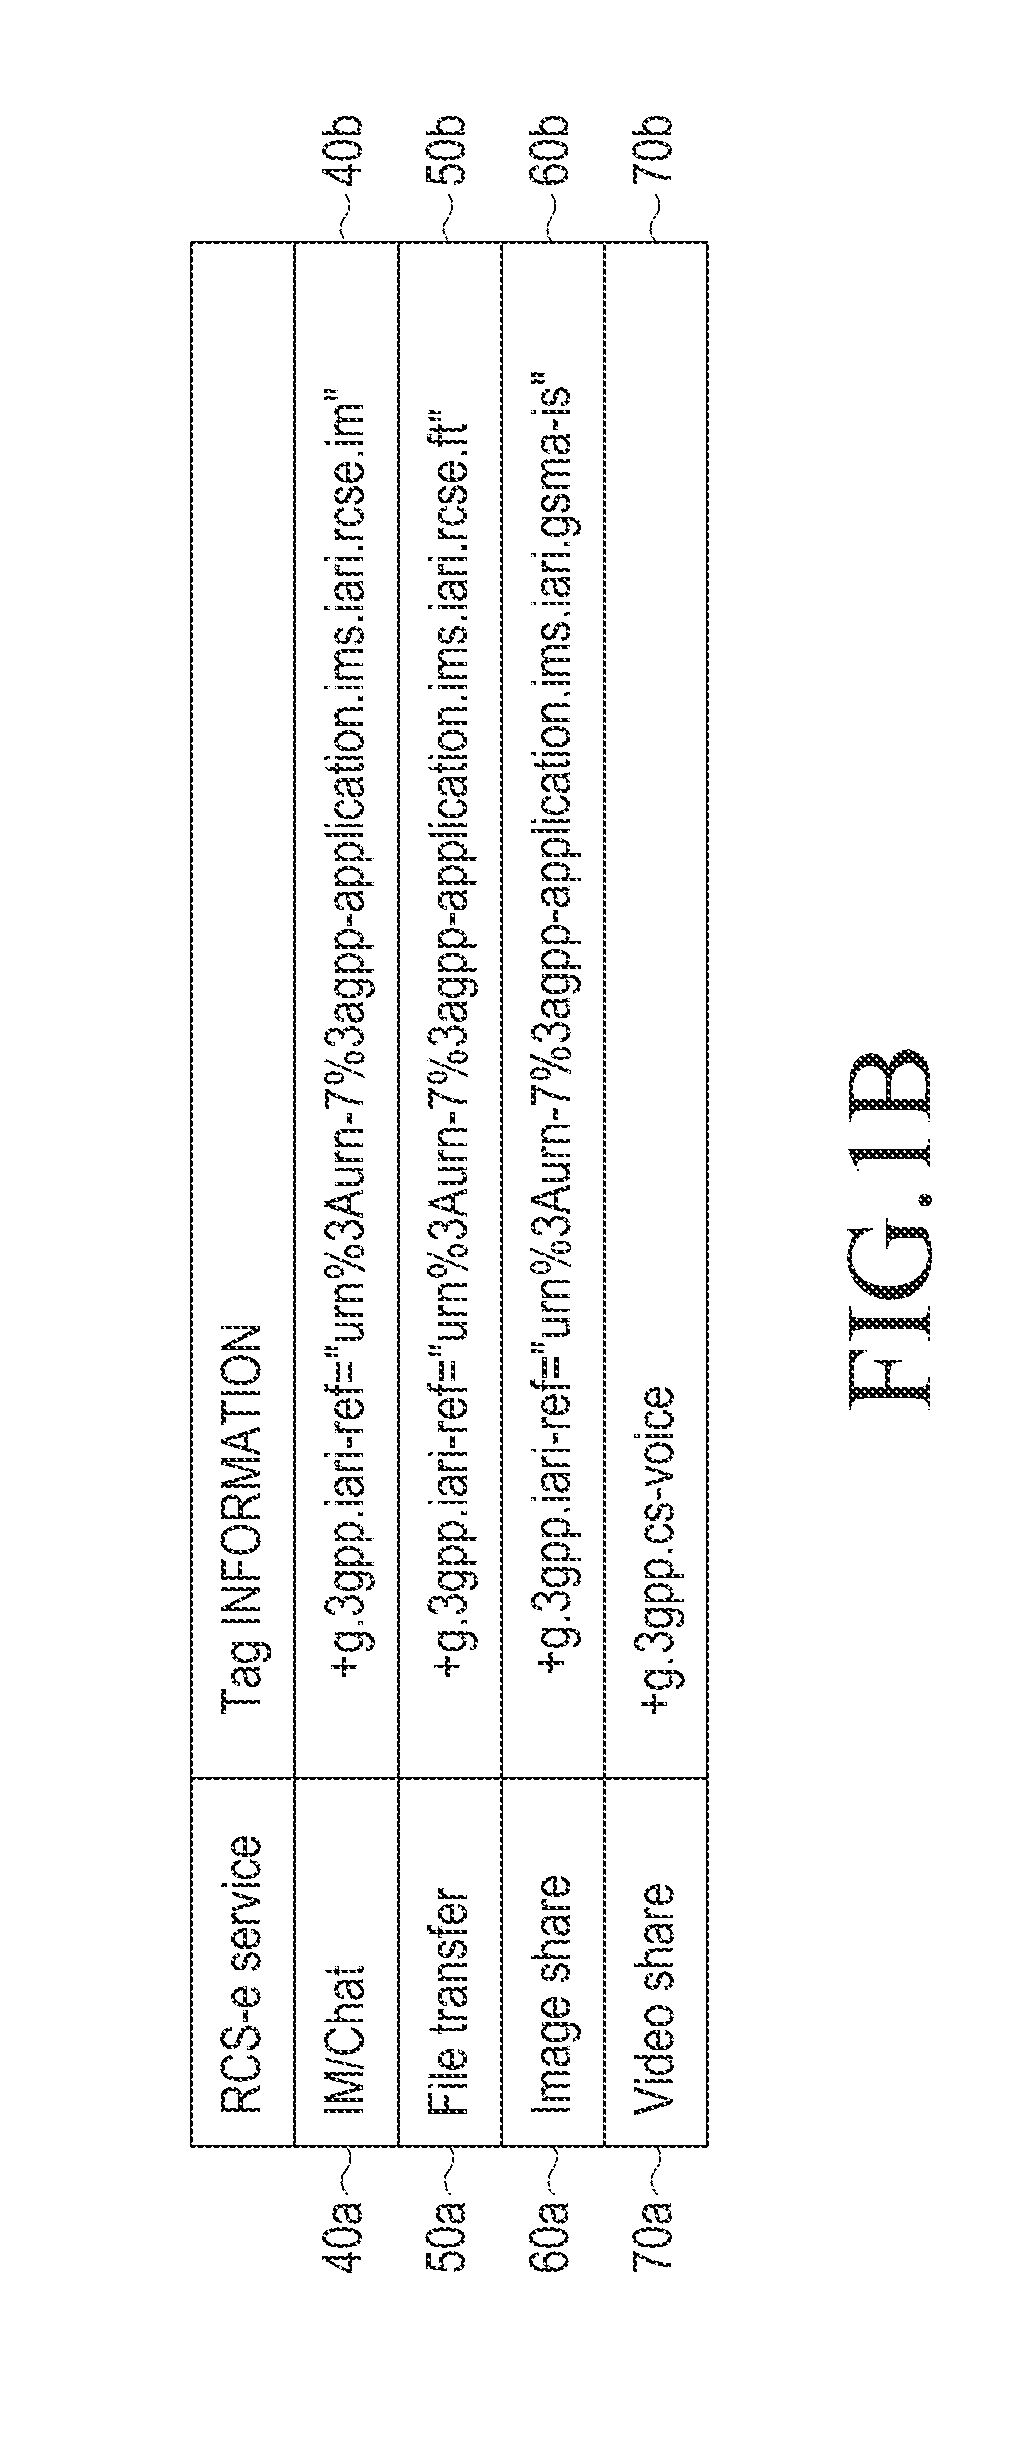 Method and apparatus for exchanging sip option message for capability discovery of rich communication suite in portable terminal